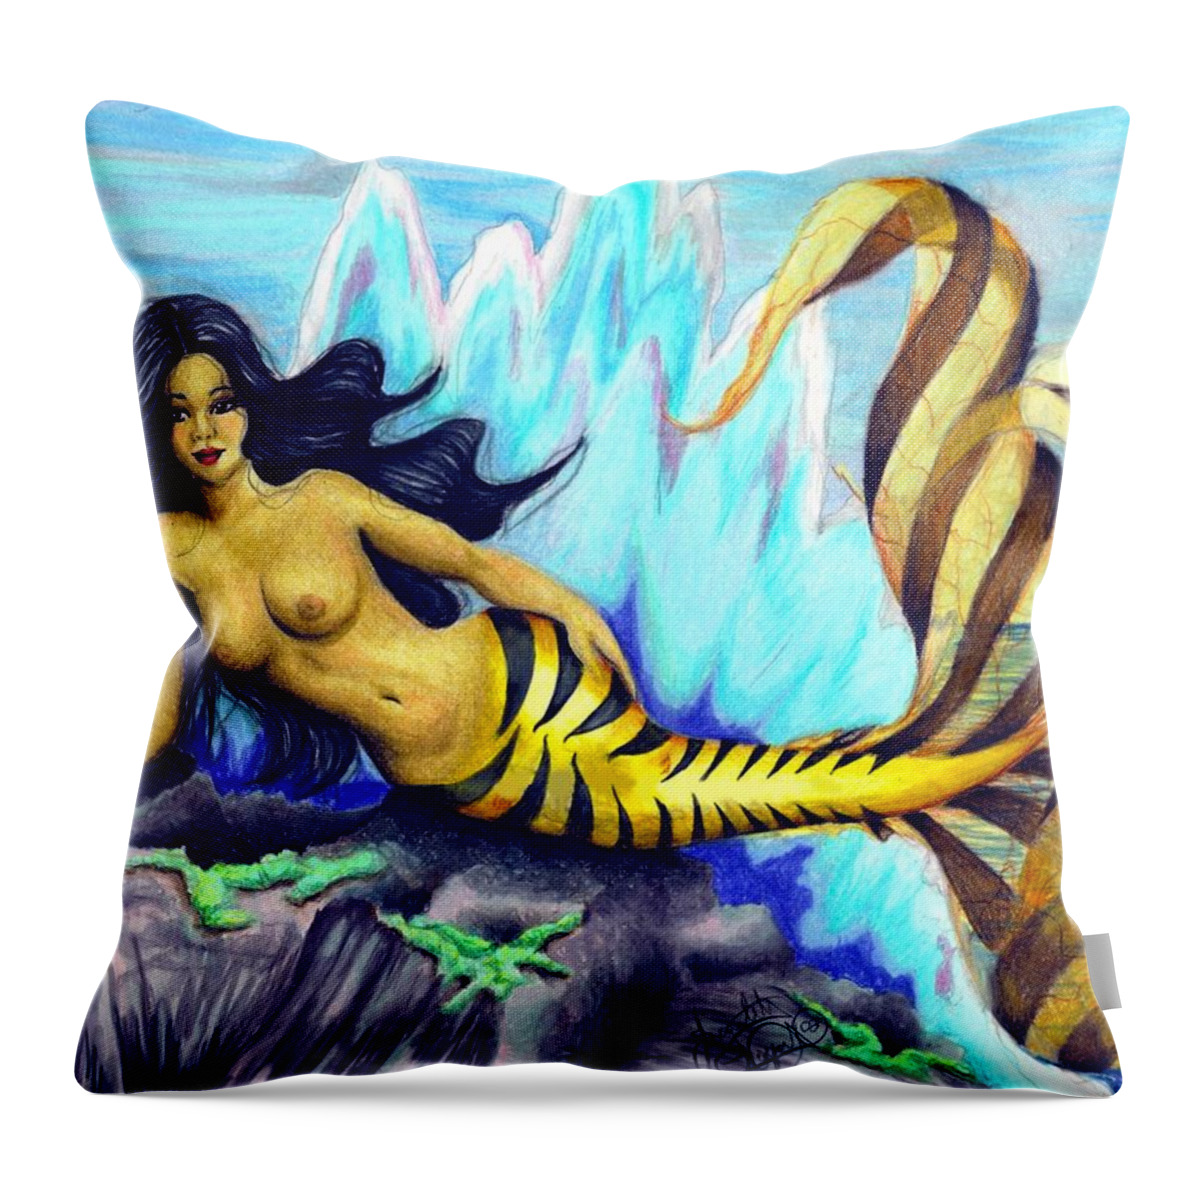 Mermaid Throw Pillow featuring the drawing Mermaid by Scarlett Royale